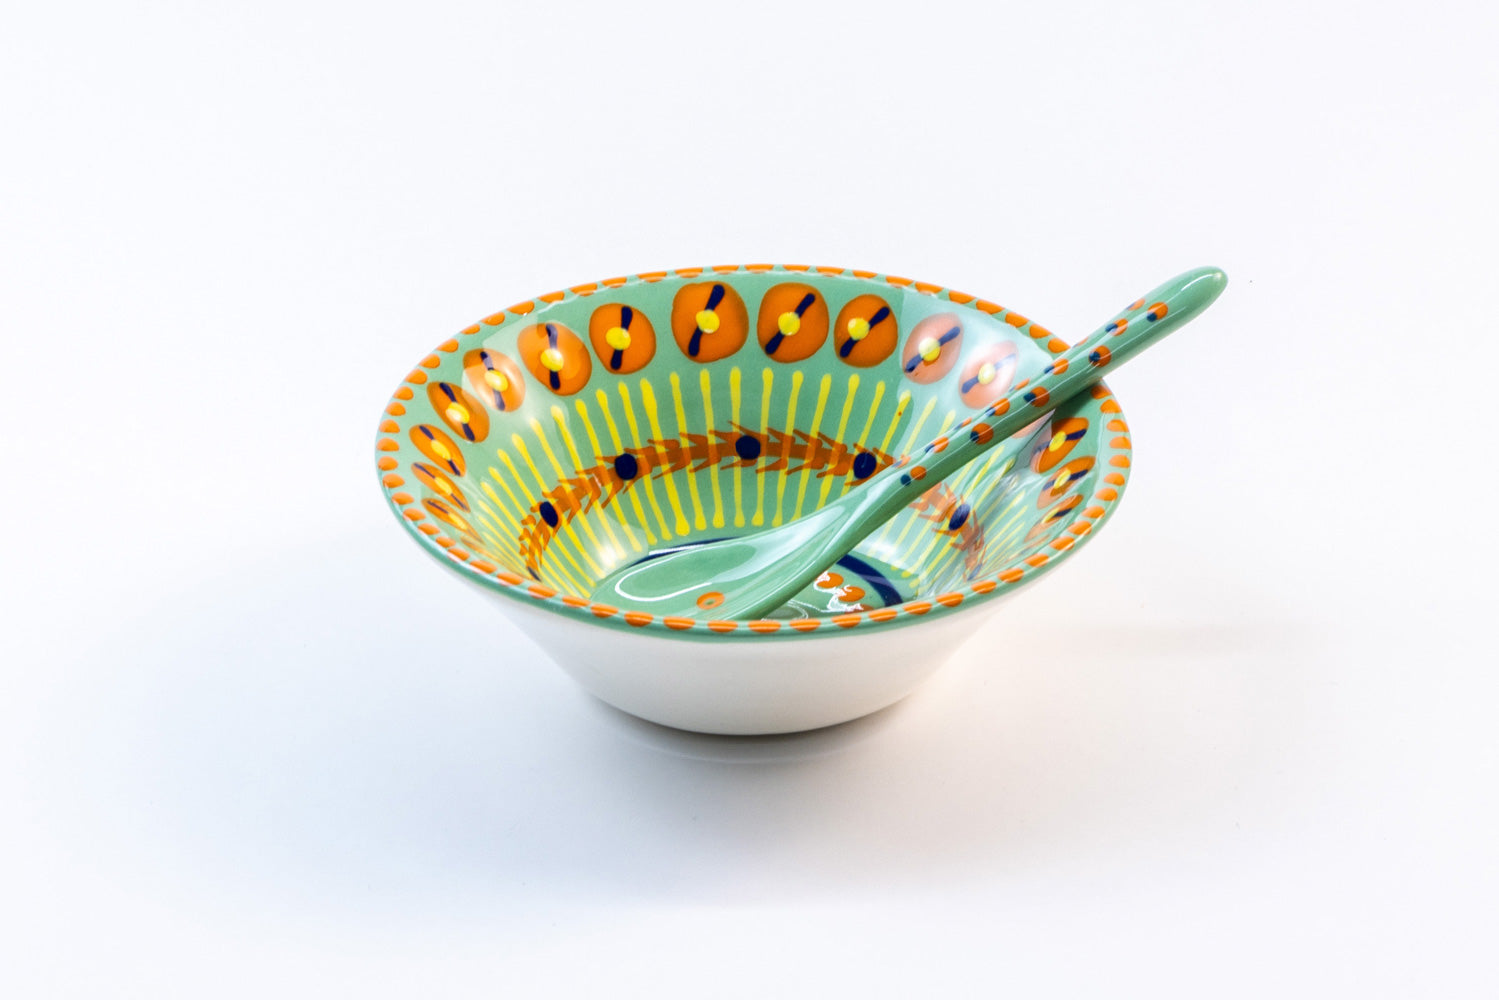 Jasper green mini nut bowl with matching small spoon in Jasper green. Dots & Stripes on top of base color in orange, yellow, & indigo blue. Perfect pair!